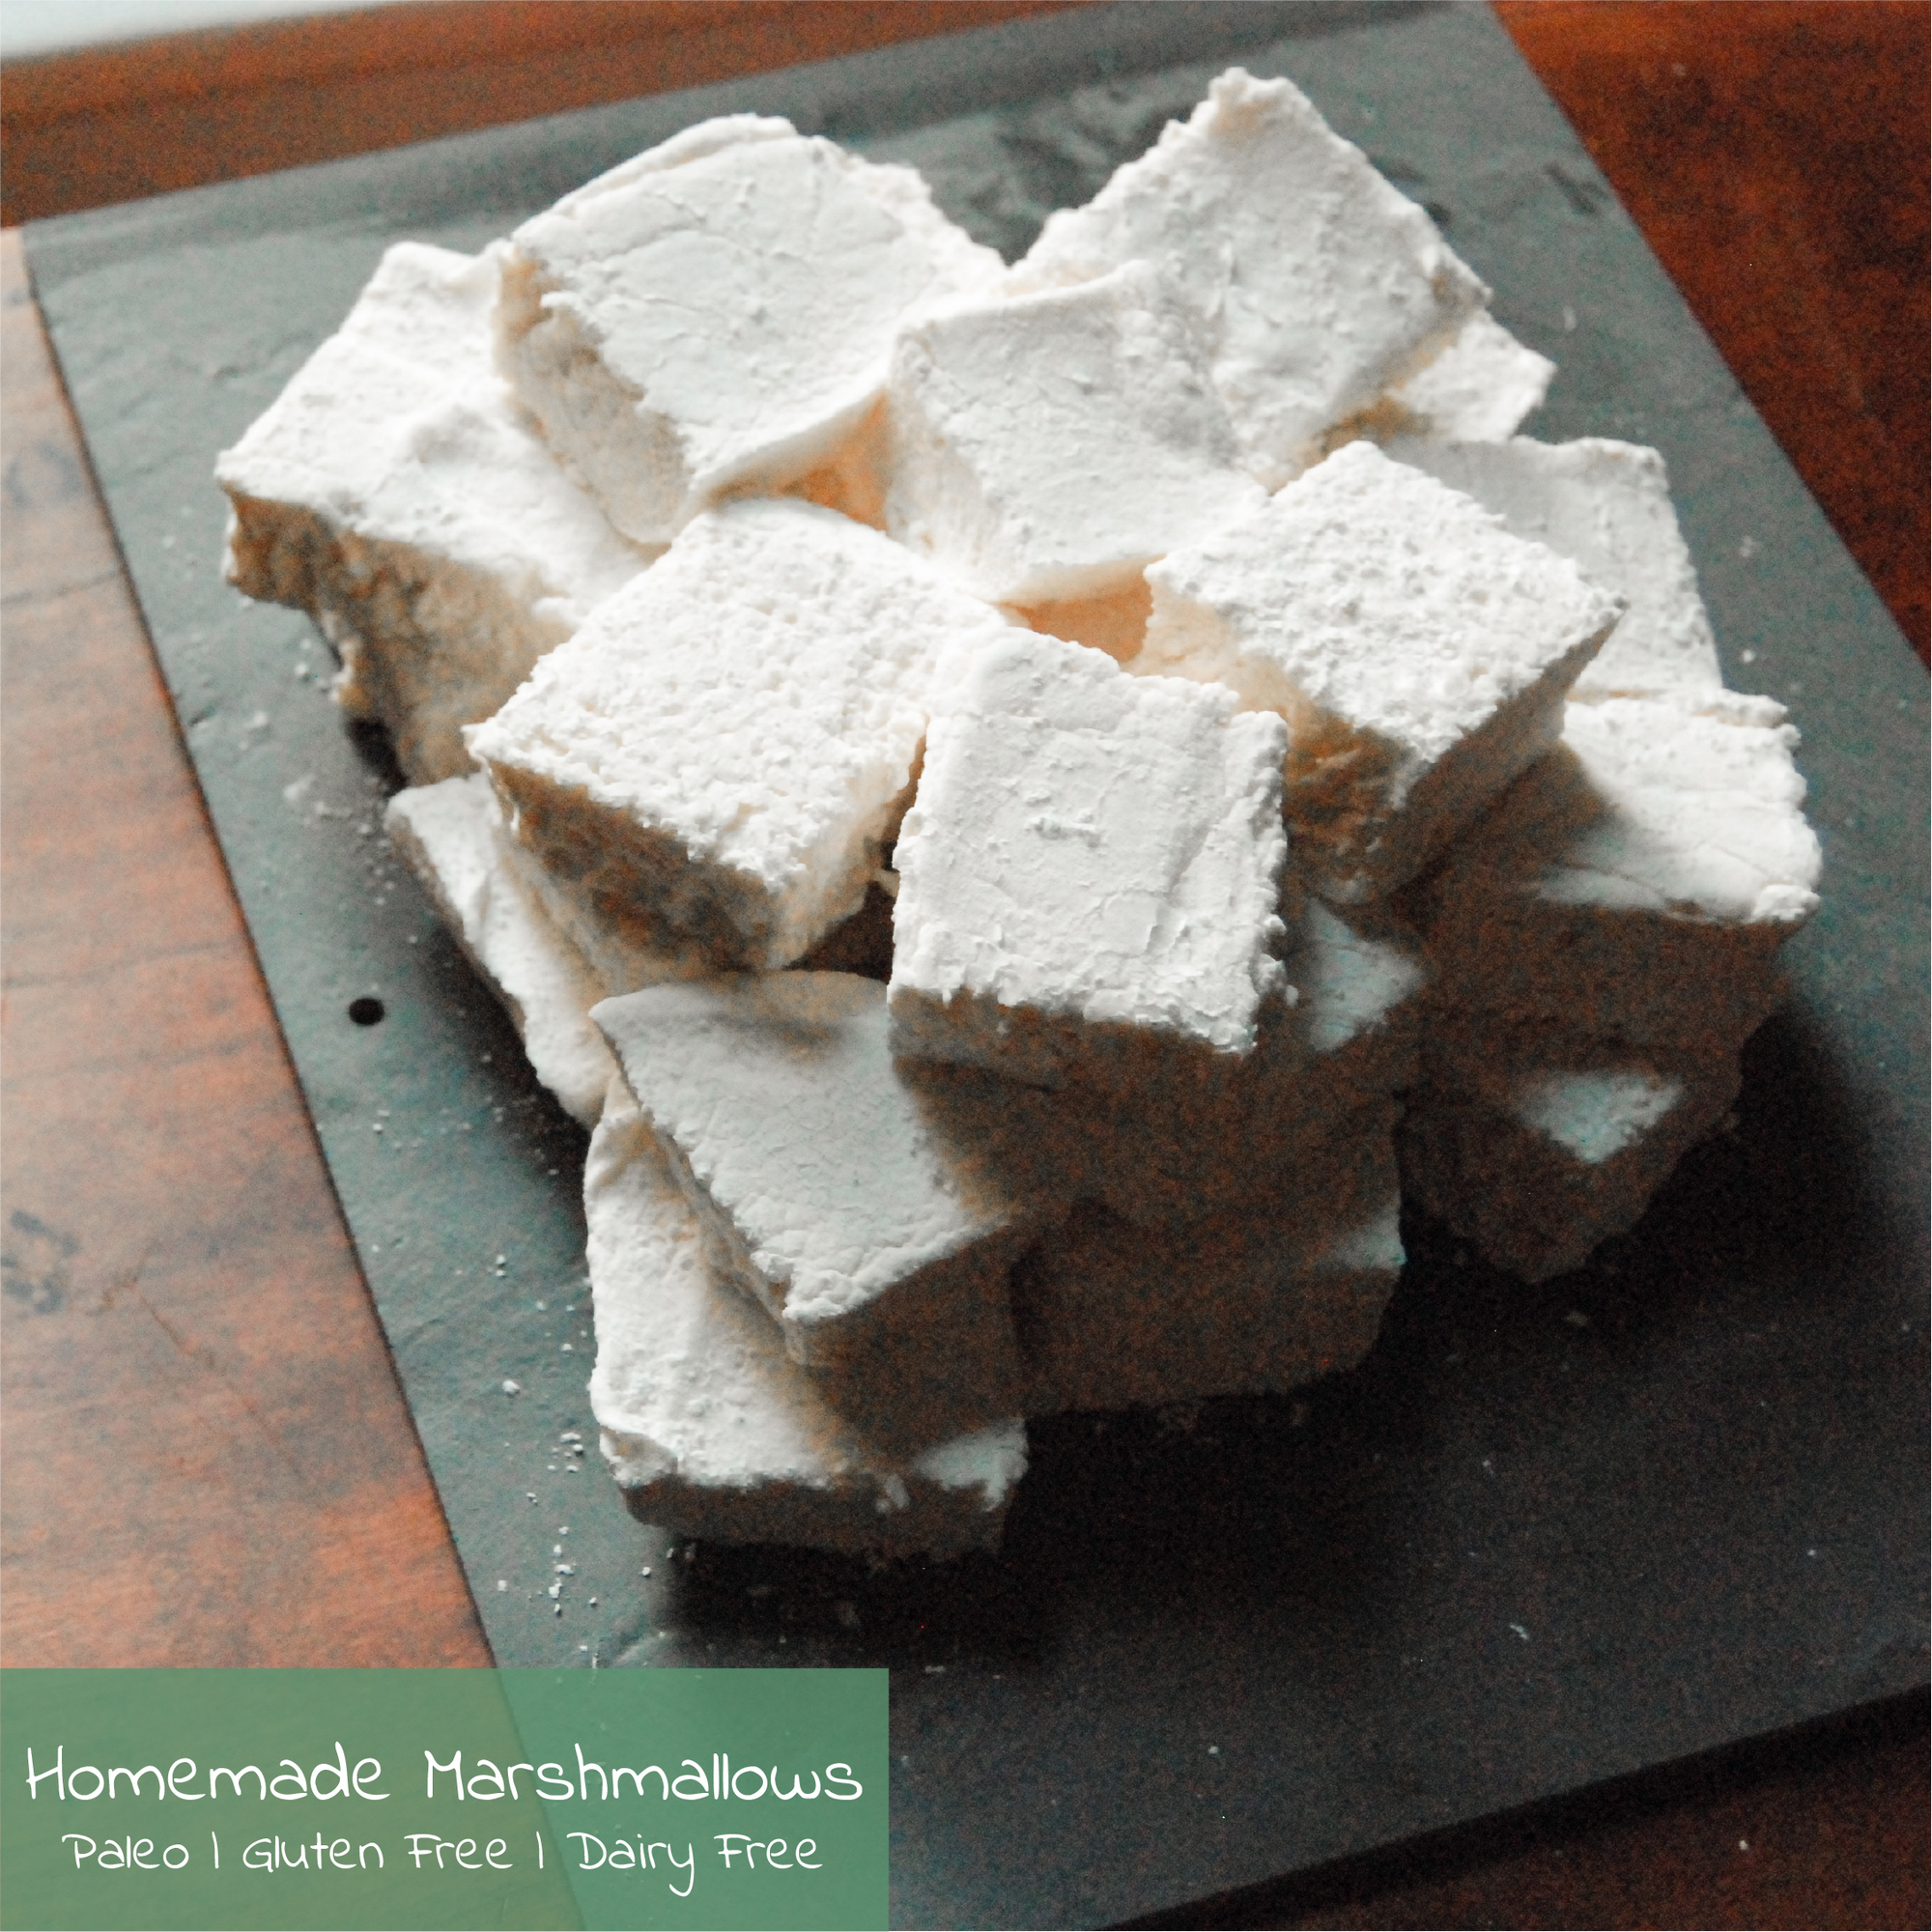 Successfully Gluten Free! : Chocolate Covered Homemade Marshmallows